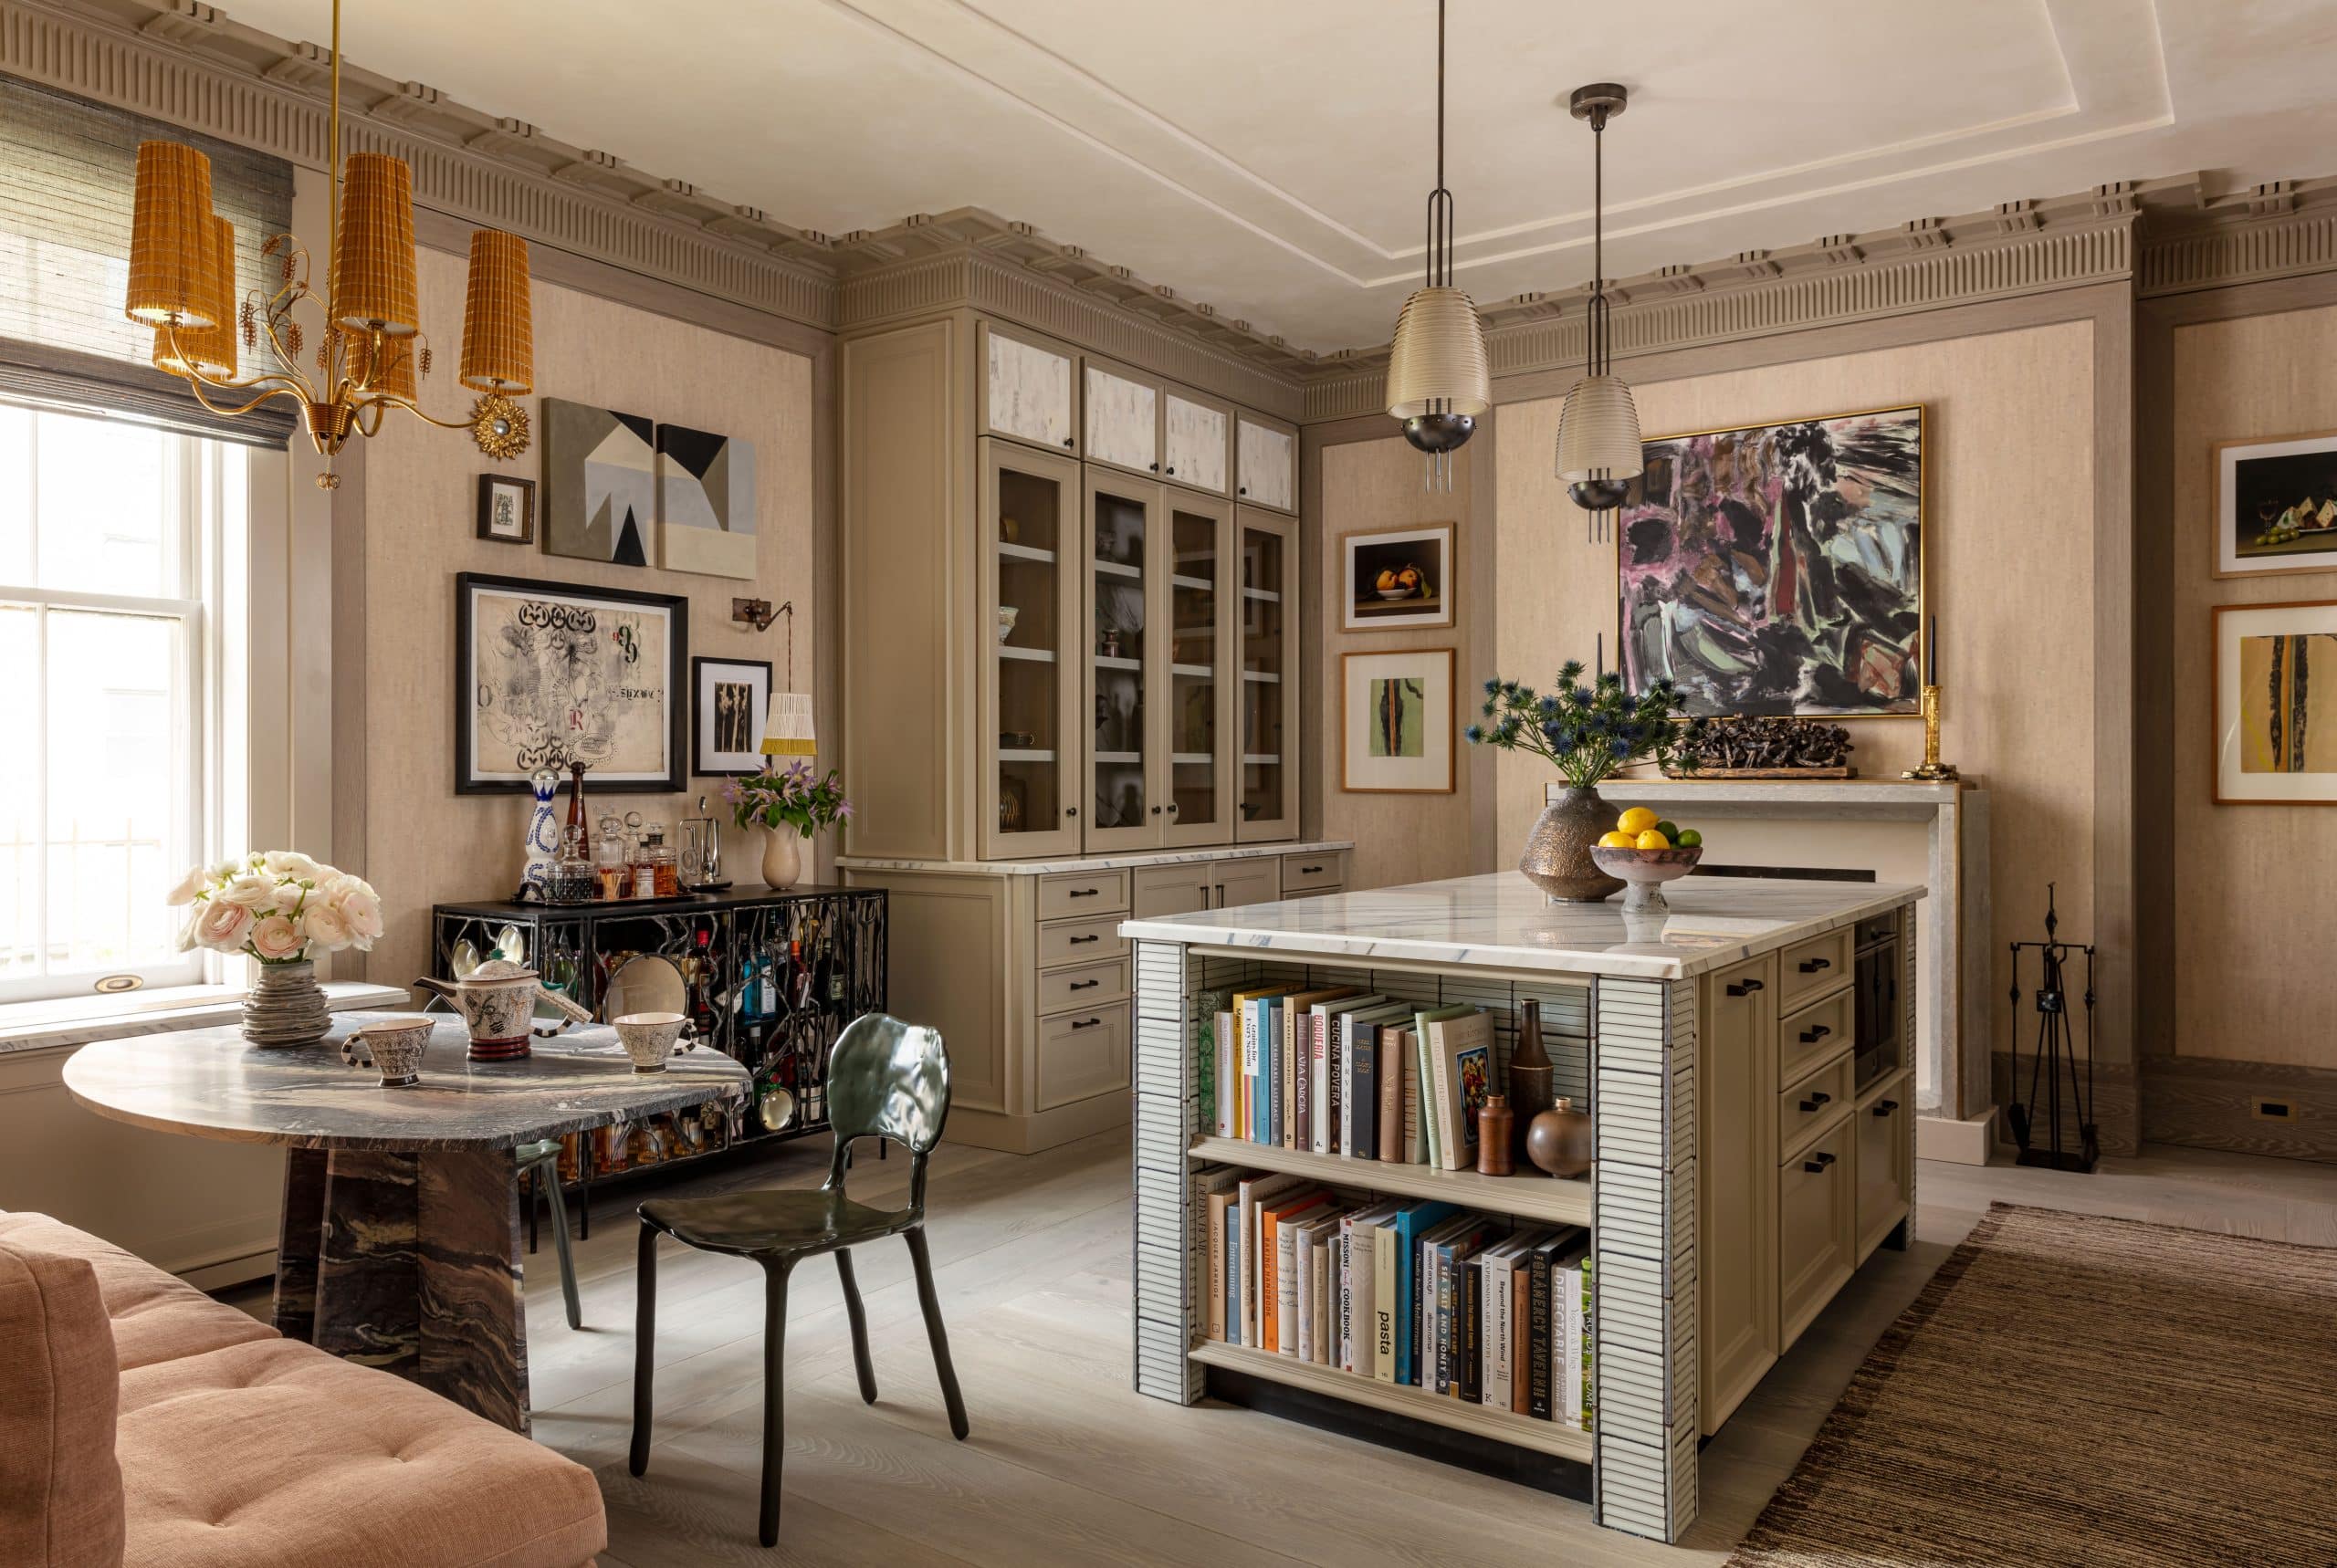 Kips Bay Decorator Show House kitchen by Wesley Moon